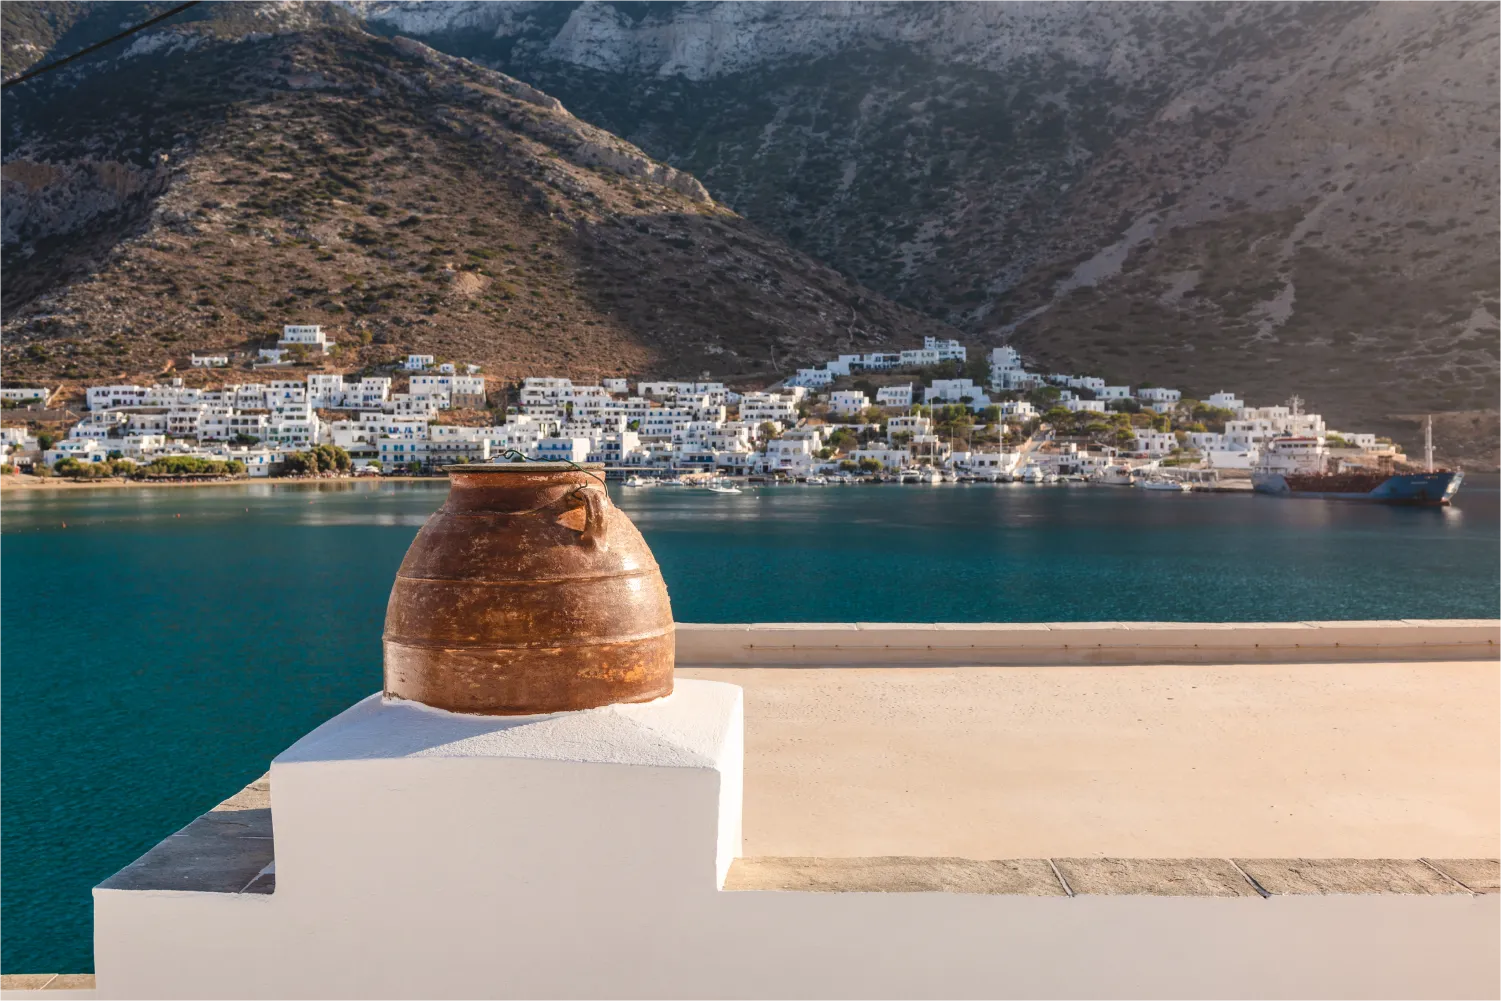 Flower Pot On The Roof Of The House Overlooking The bay of Sifnos town